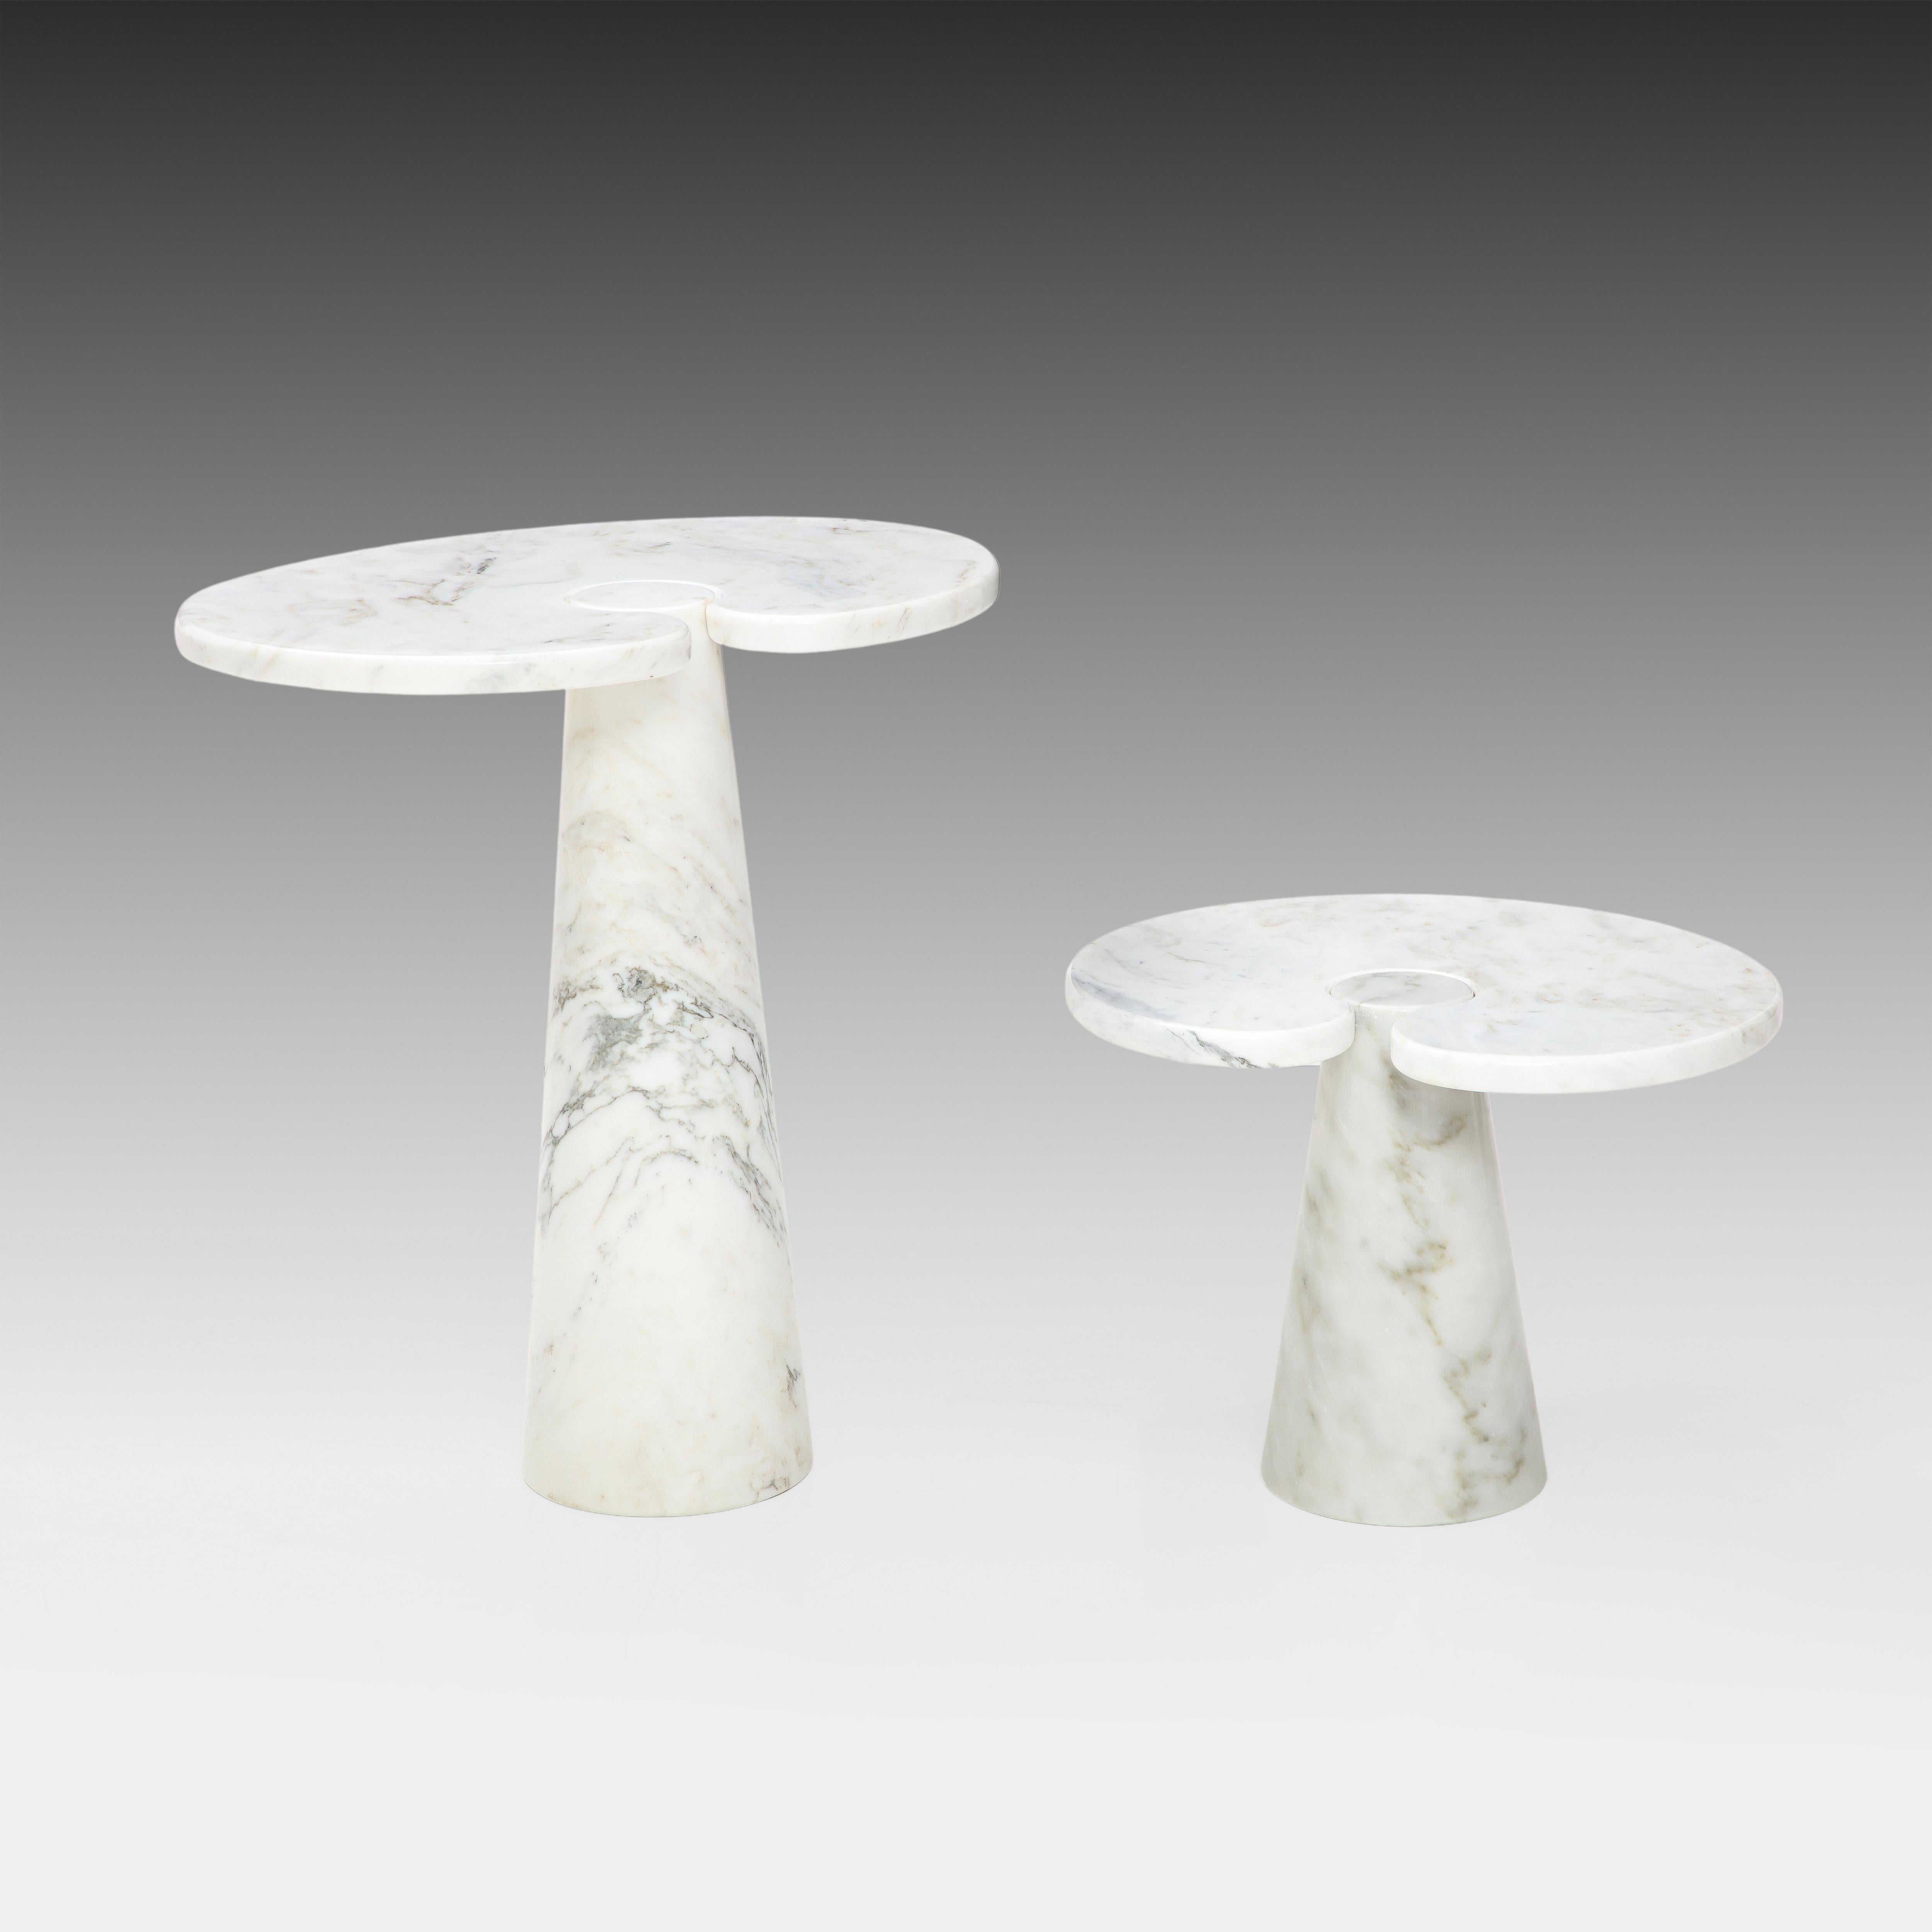 Angelo Mangiarotti Carrara Marble Side Table from 'Eros' Series, 1971 For Sale 4